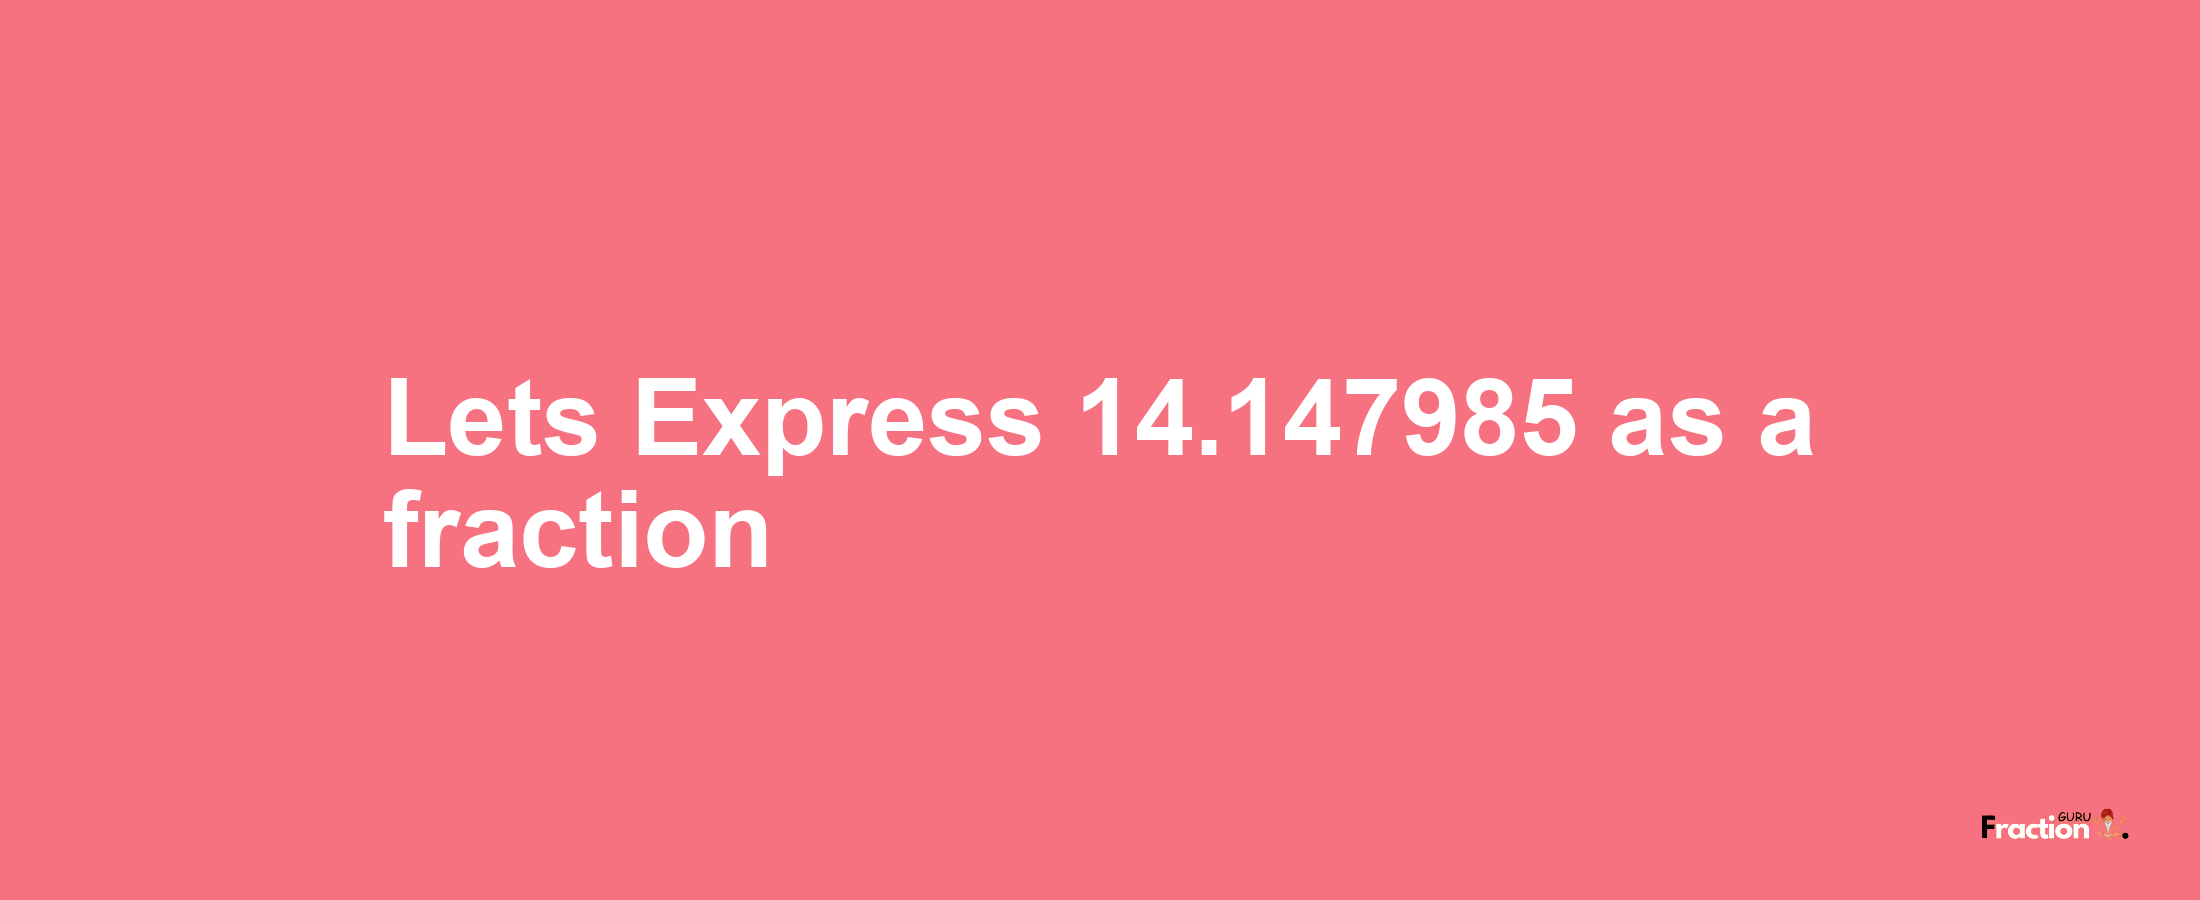 Lets Express 14.147985 as afraction